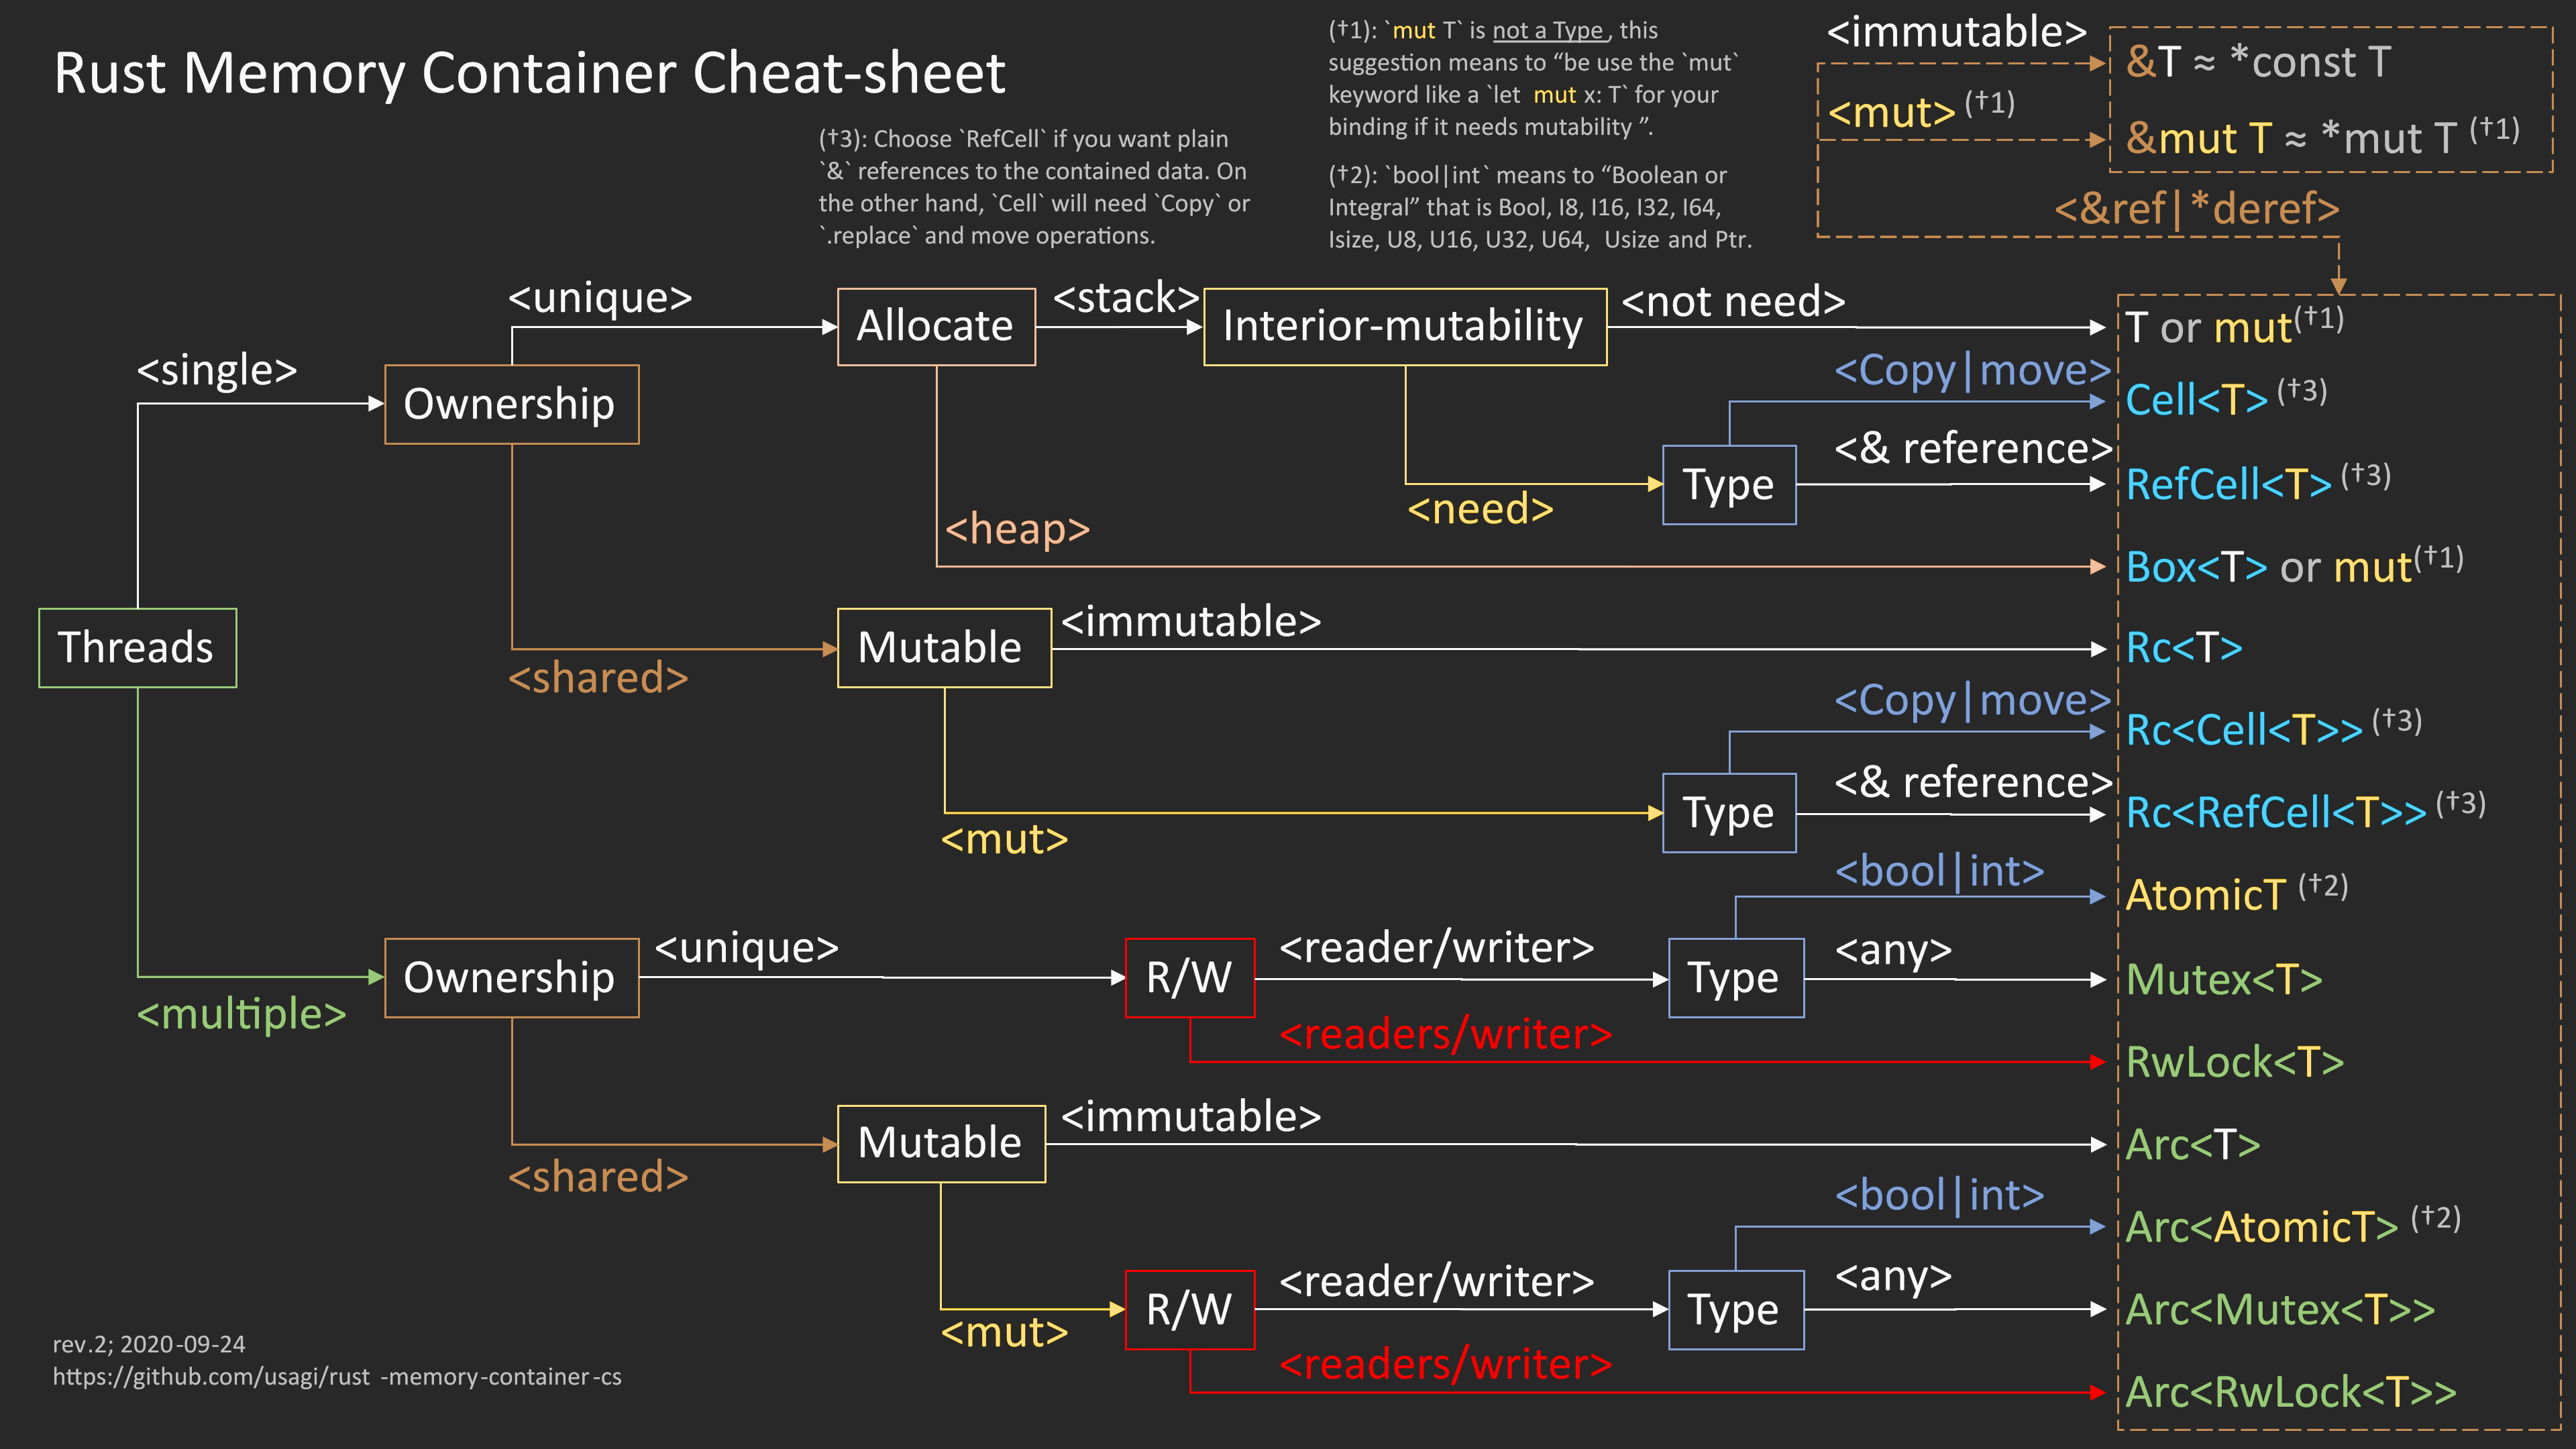 Rust memory container cheat sheet